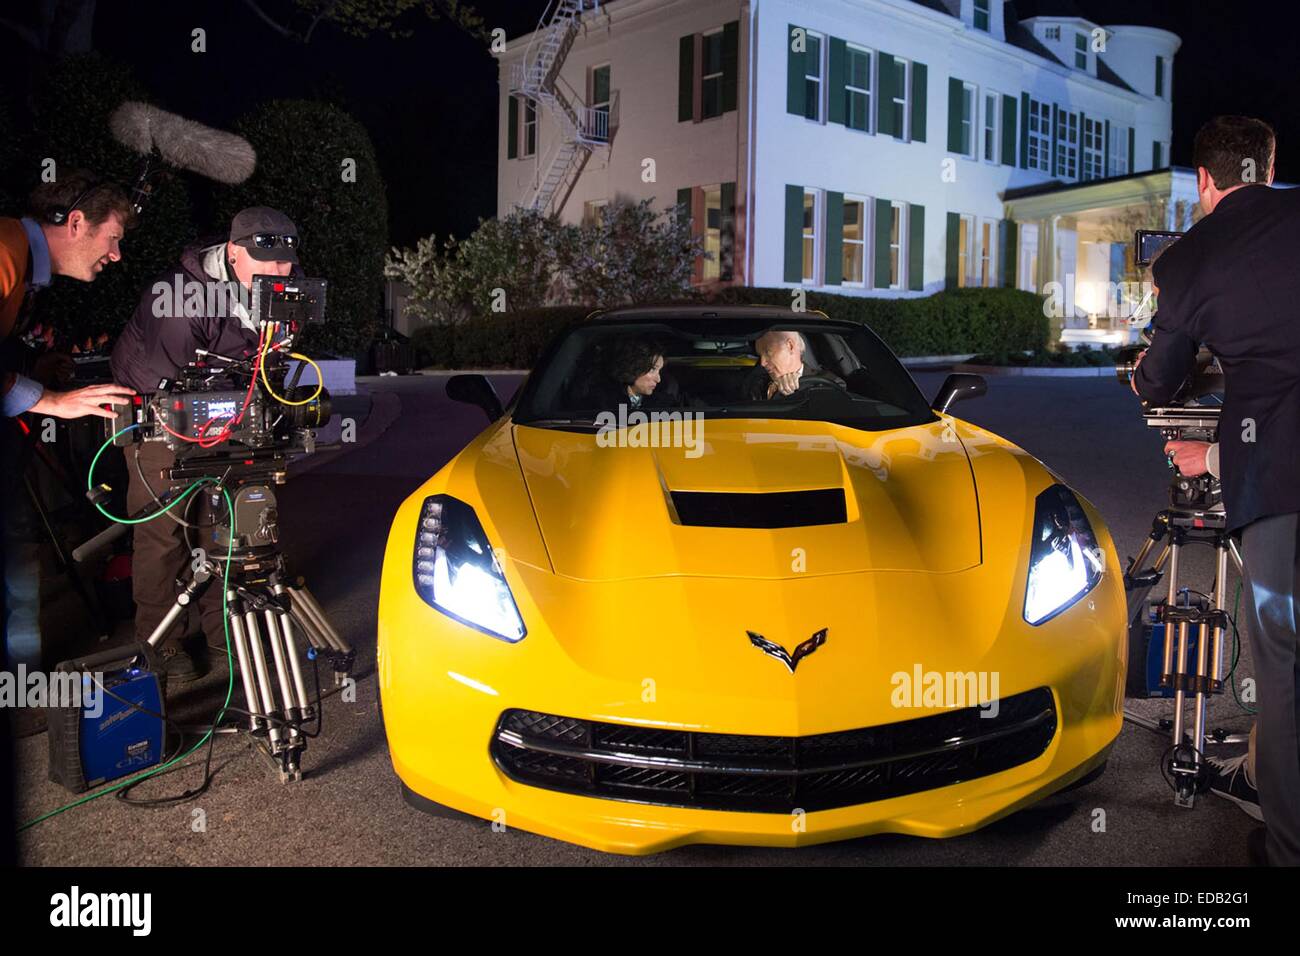 US Vice President Joe Biden films a scene from the HBO show 'Veep' with actress Julia Louis-Dreyfus, near the gate at the Naval Observatory Residence April 23, 2014 in Washington, DC. Stock Photo